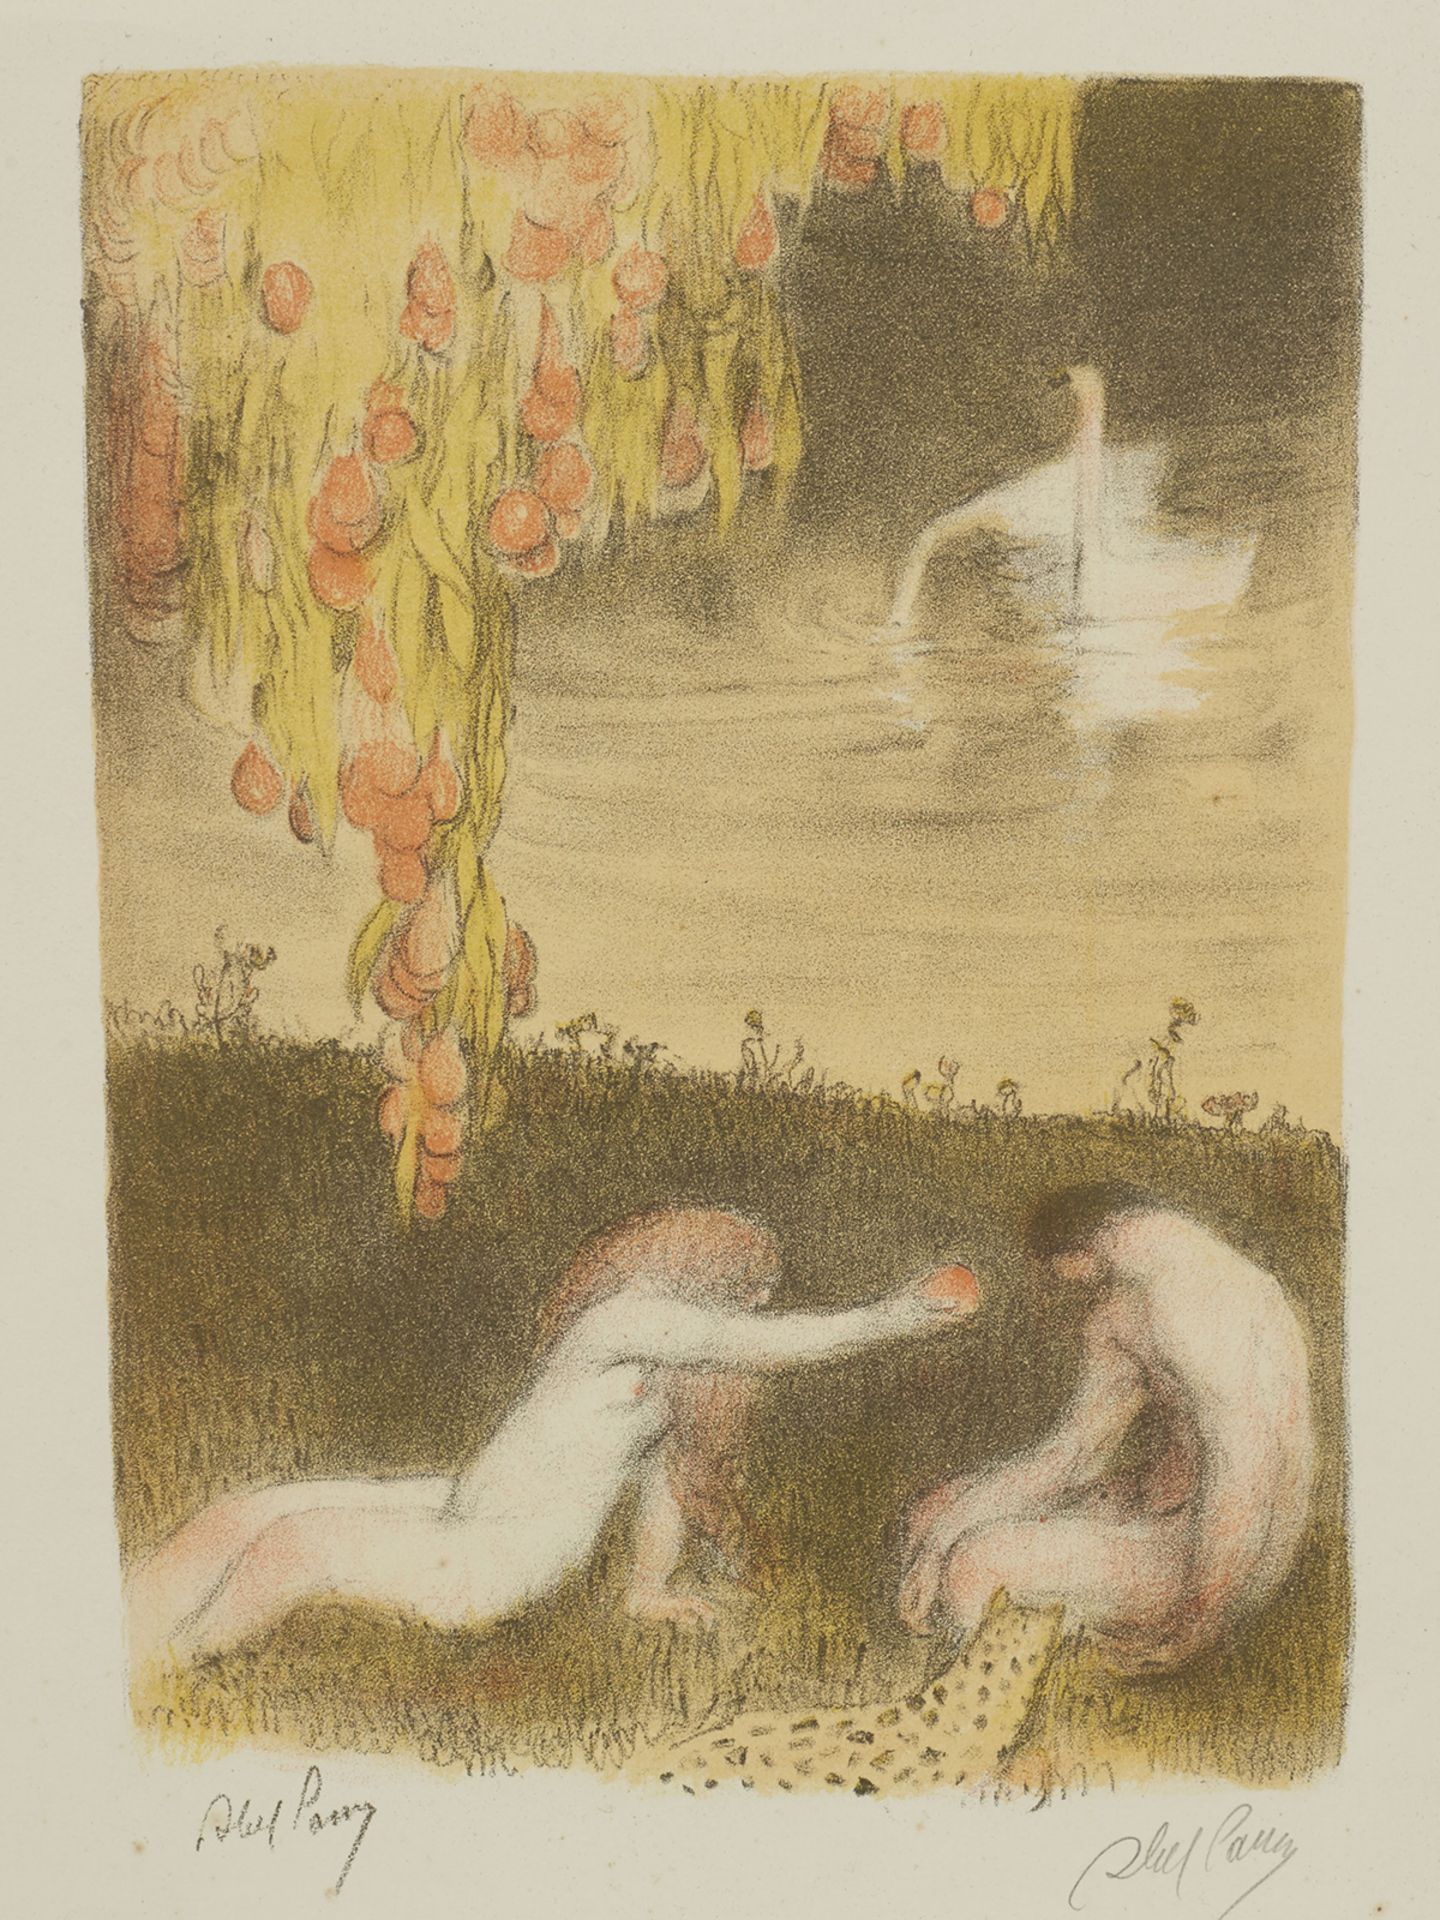 HANDMADE PRINT OF ADAM AND EVE, SIGNED PARRY, 20TH C. - Image 2 of 7